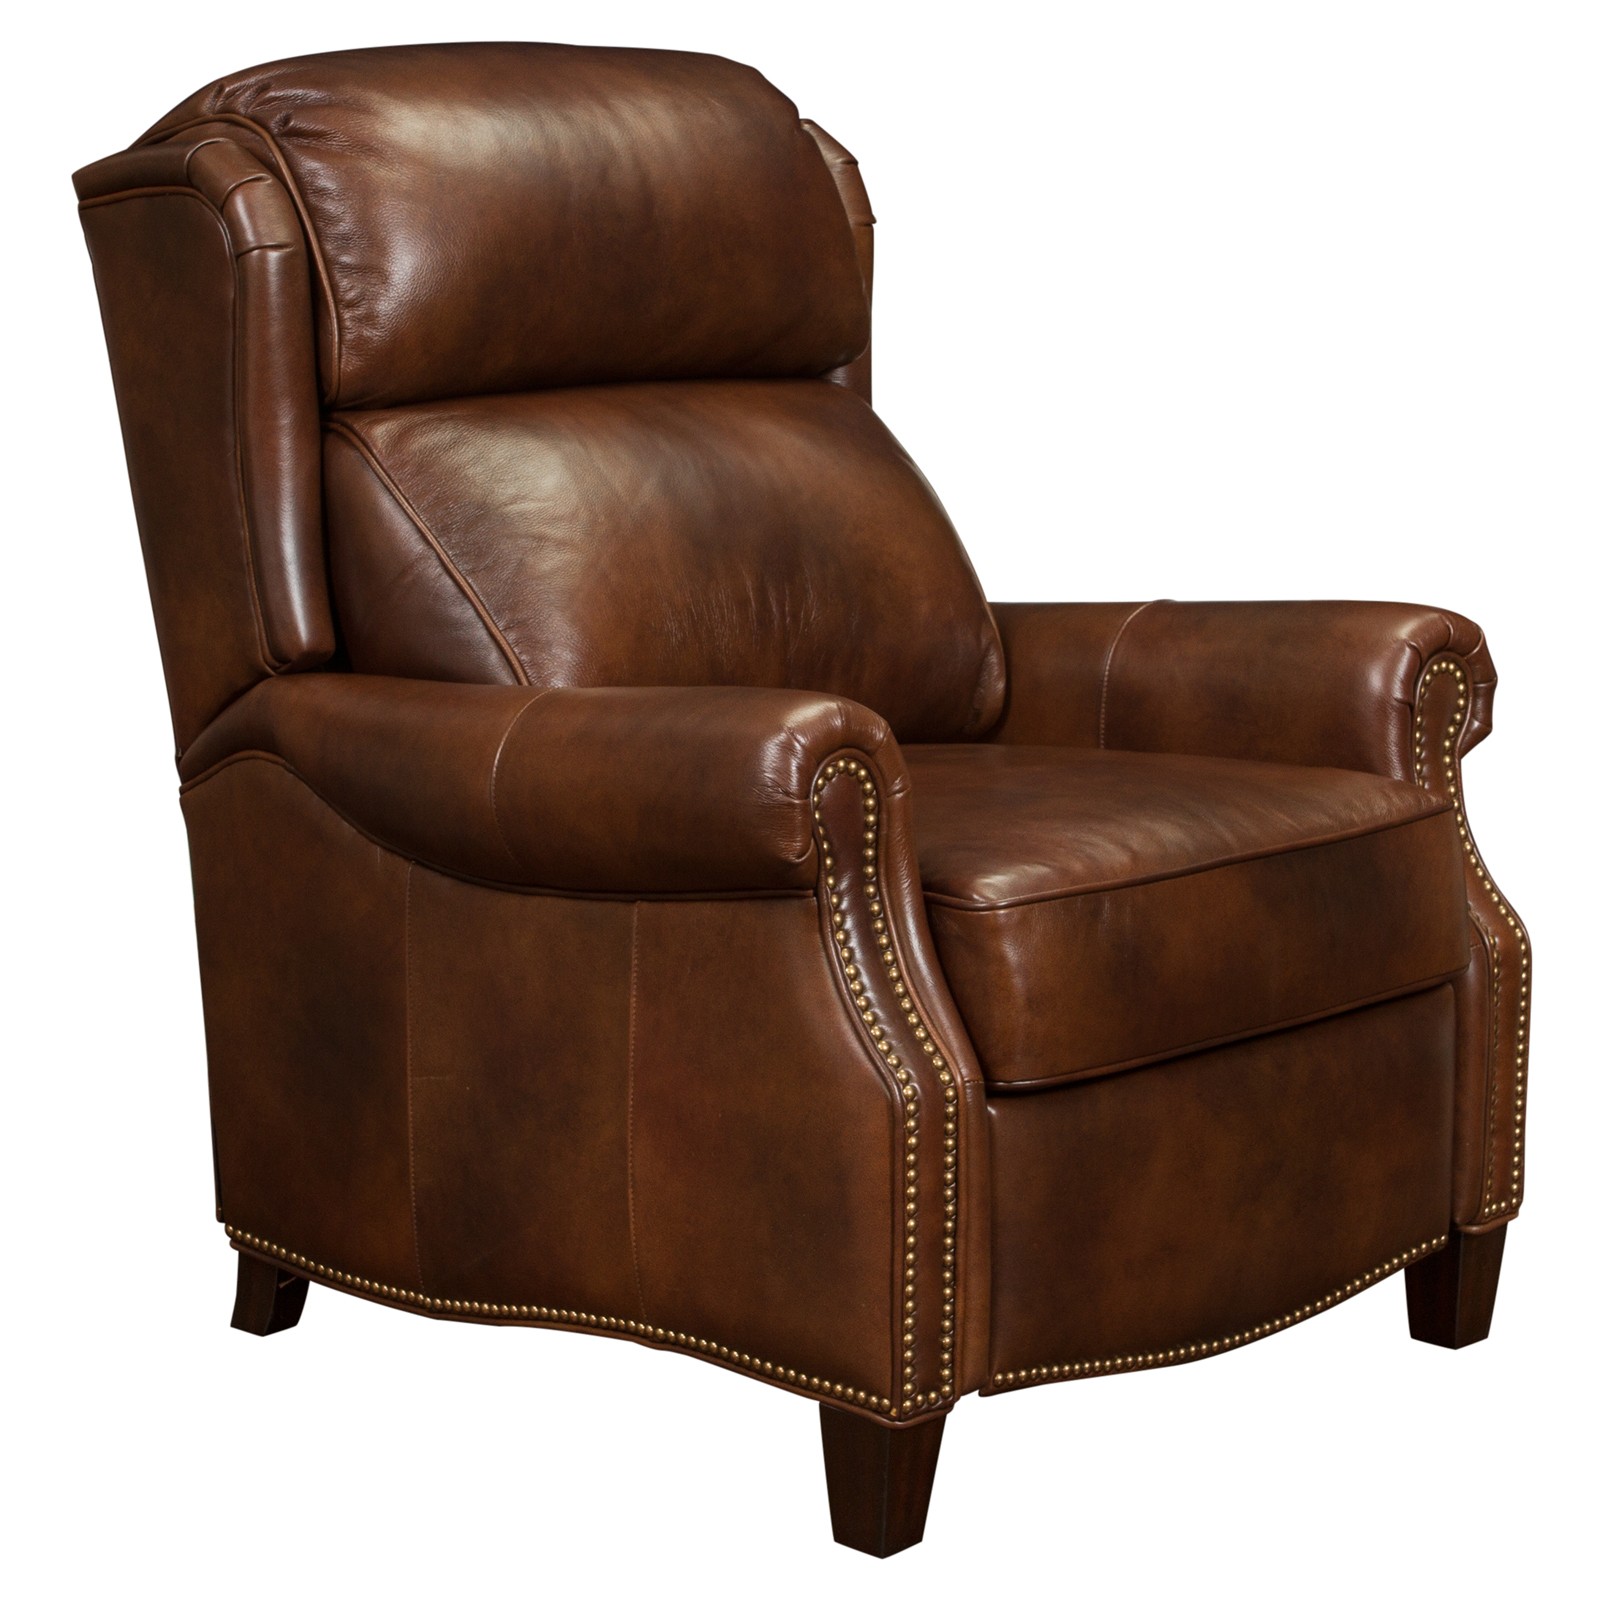 Barcalounger meade leather recliner recliners at hayneedle